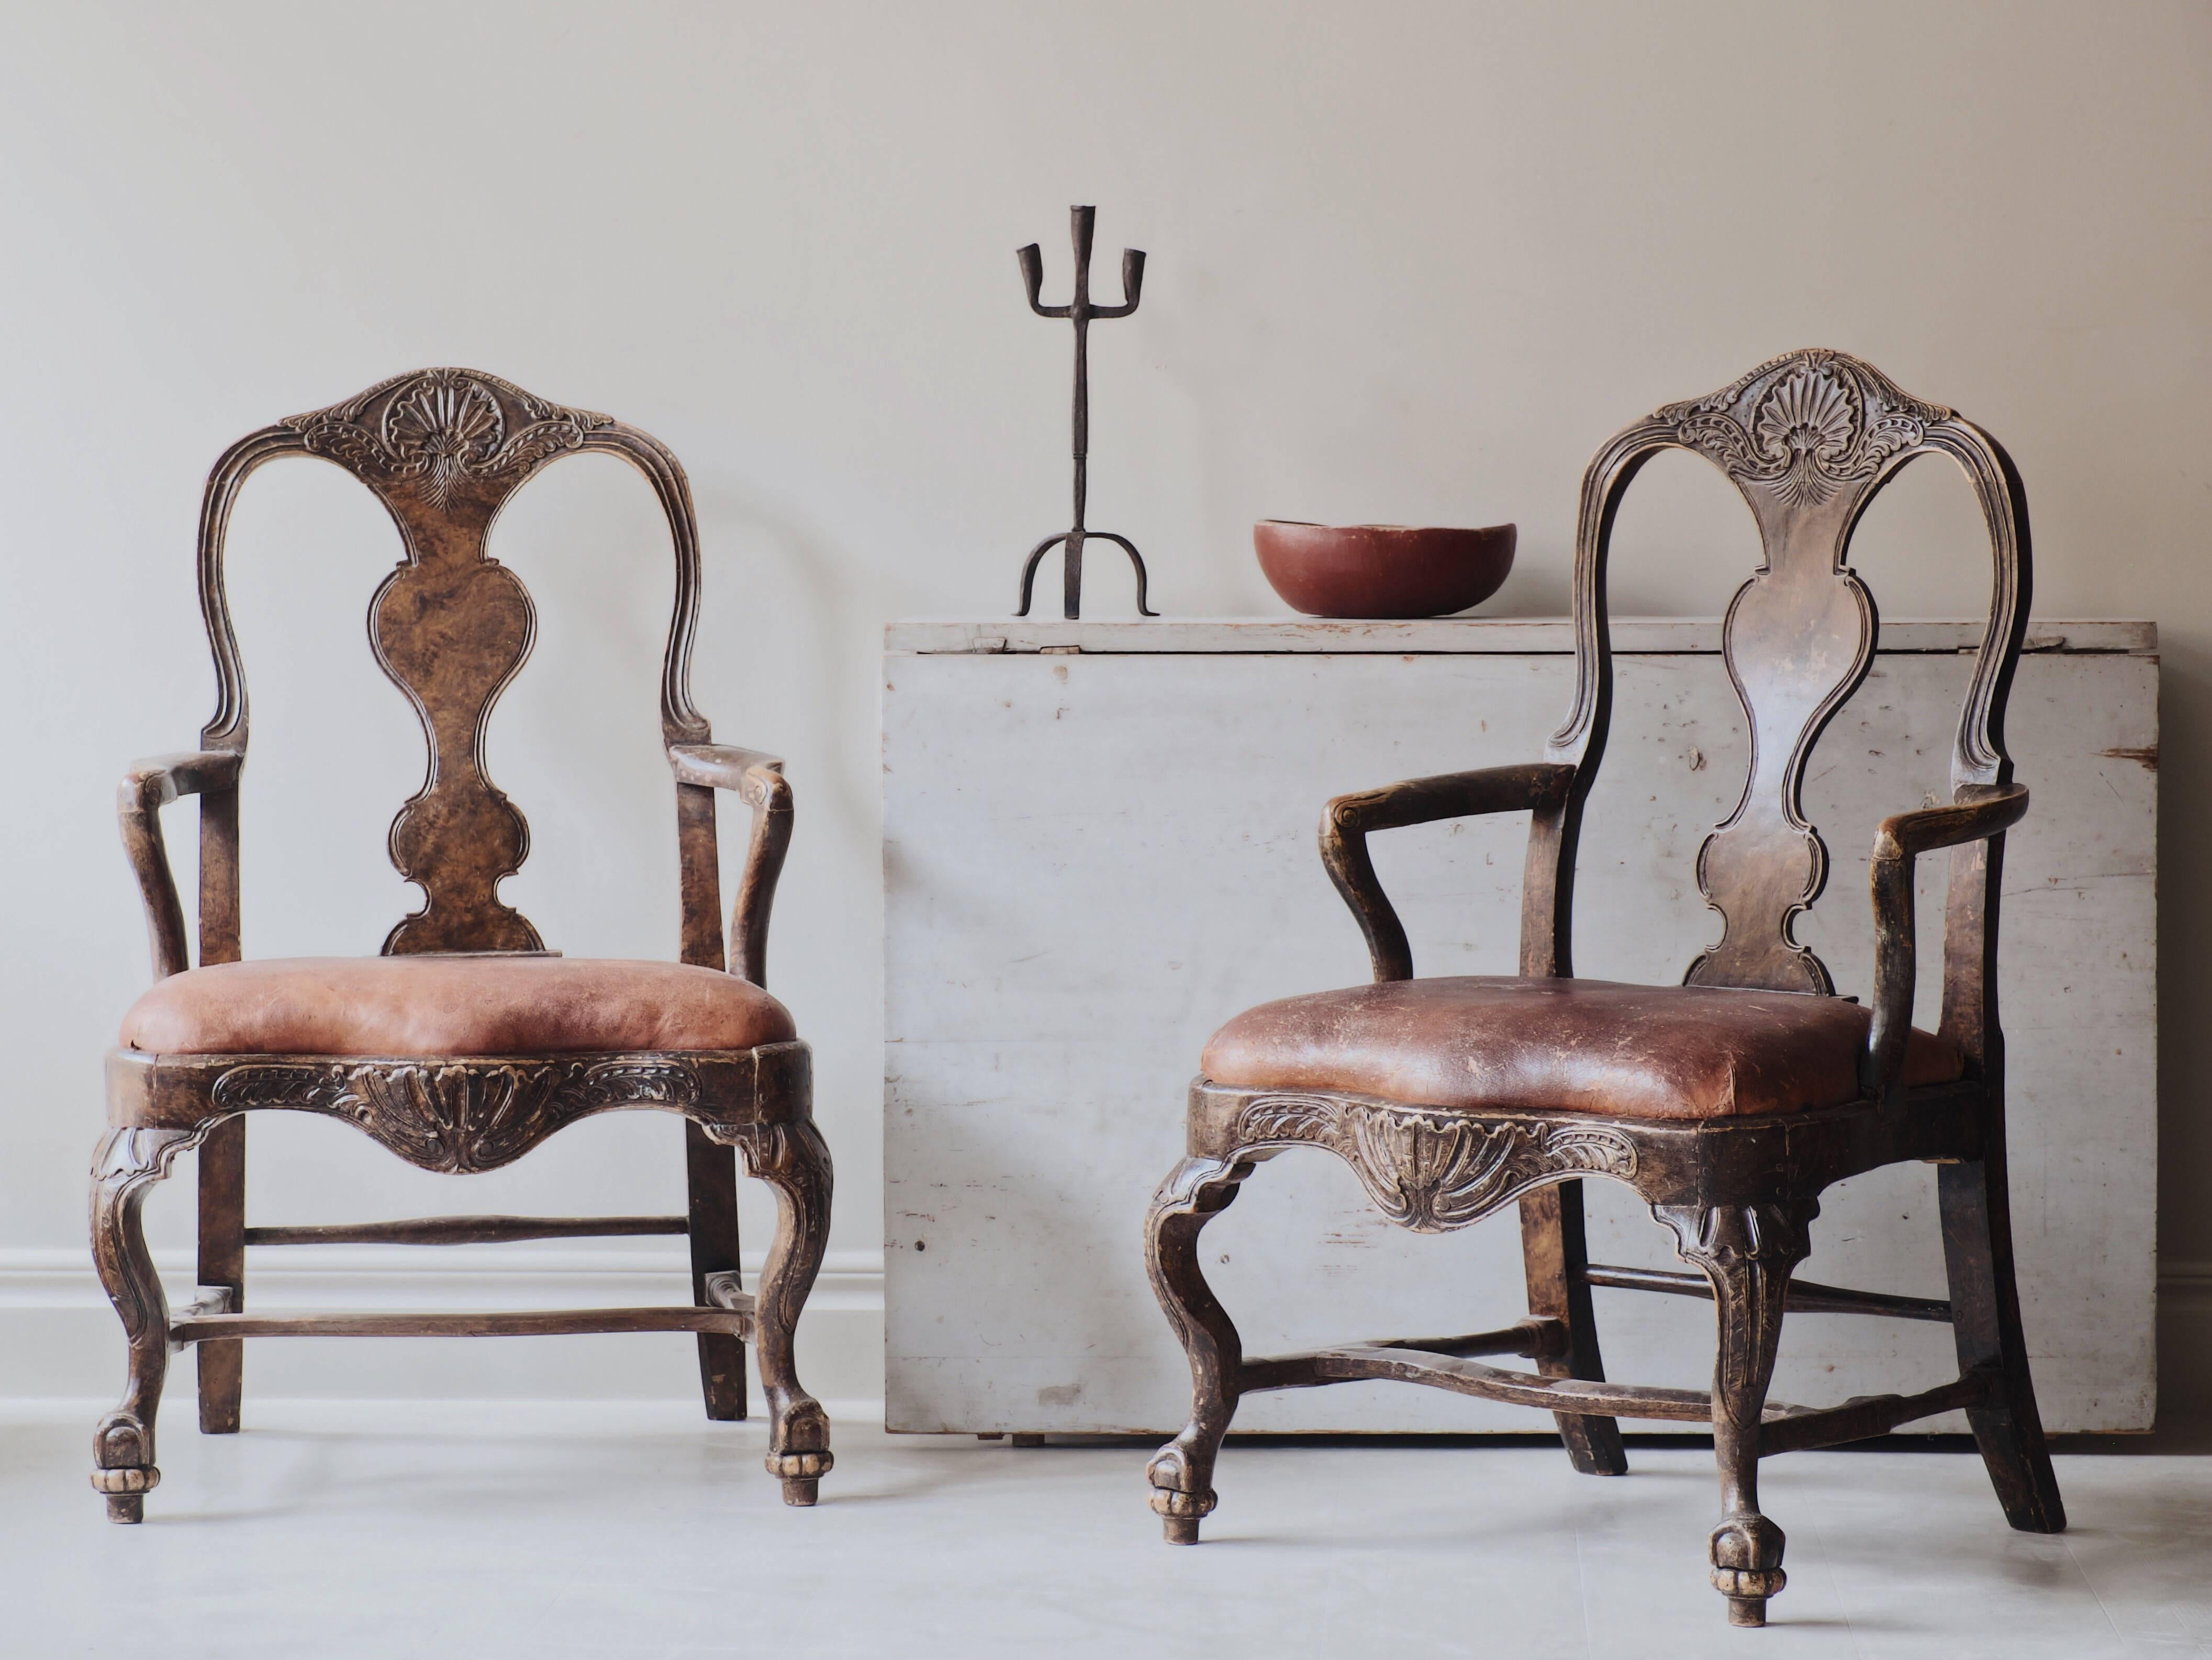 Remarkable pair of 18th century Swedish transitional Baroque or Rococo armchairs with fine carvings with a great patina to the surface, circa 1750, Sweden.